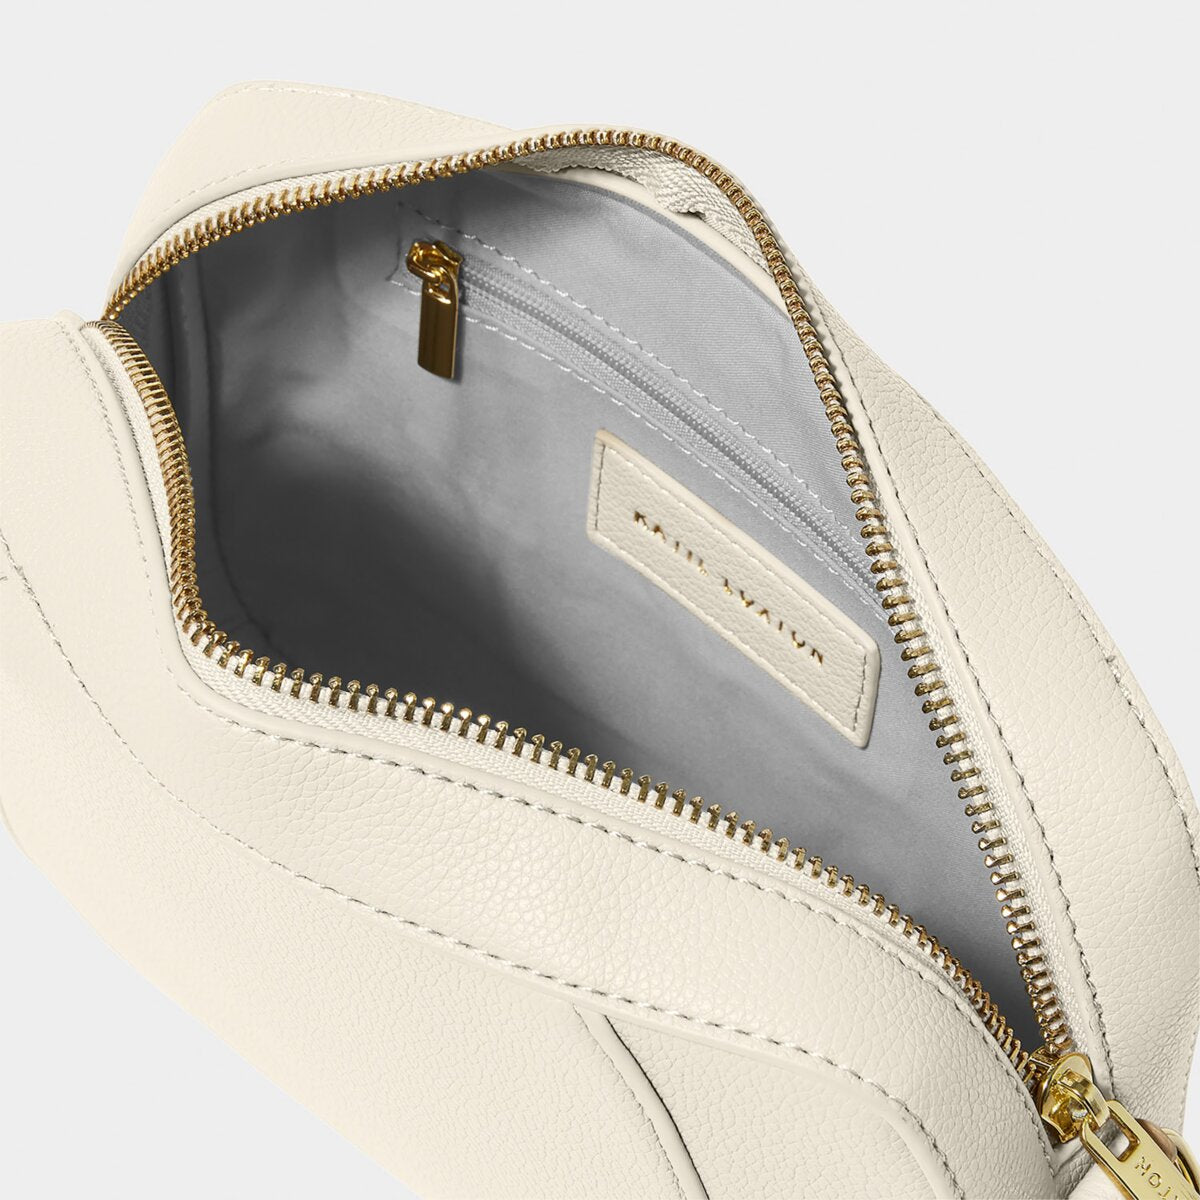 internal shot of off-white crossbody bag  with grey lining and zipped internal pocket